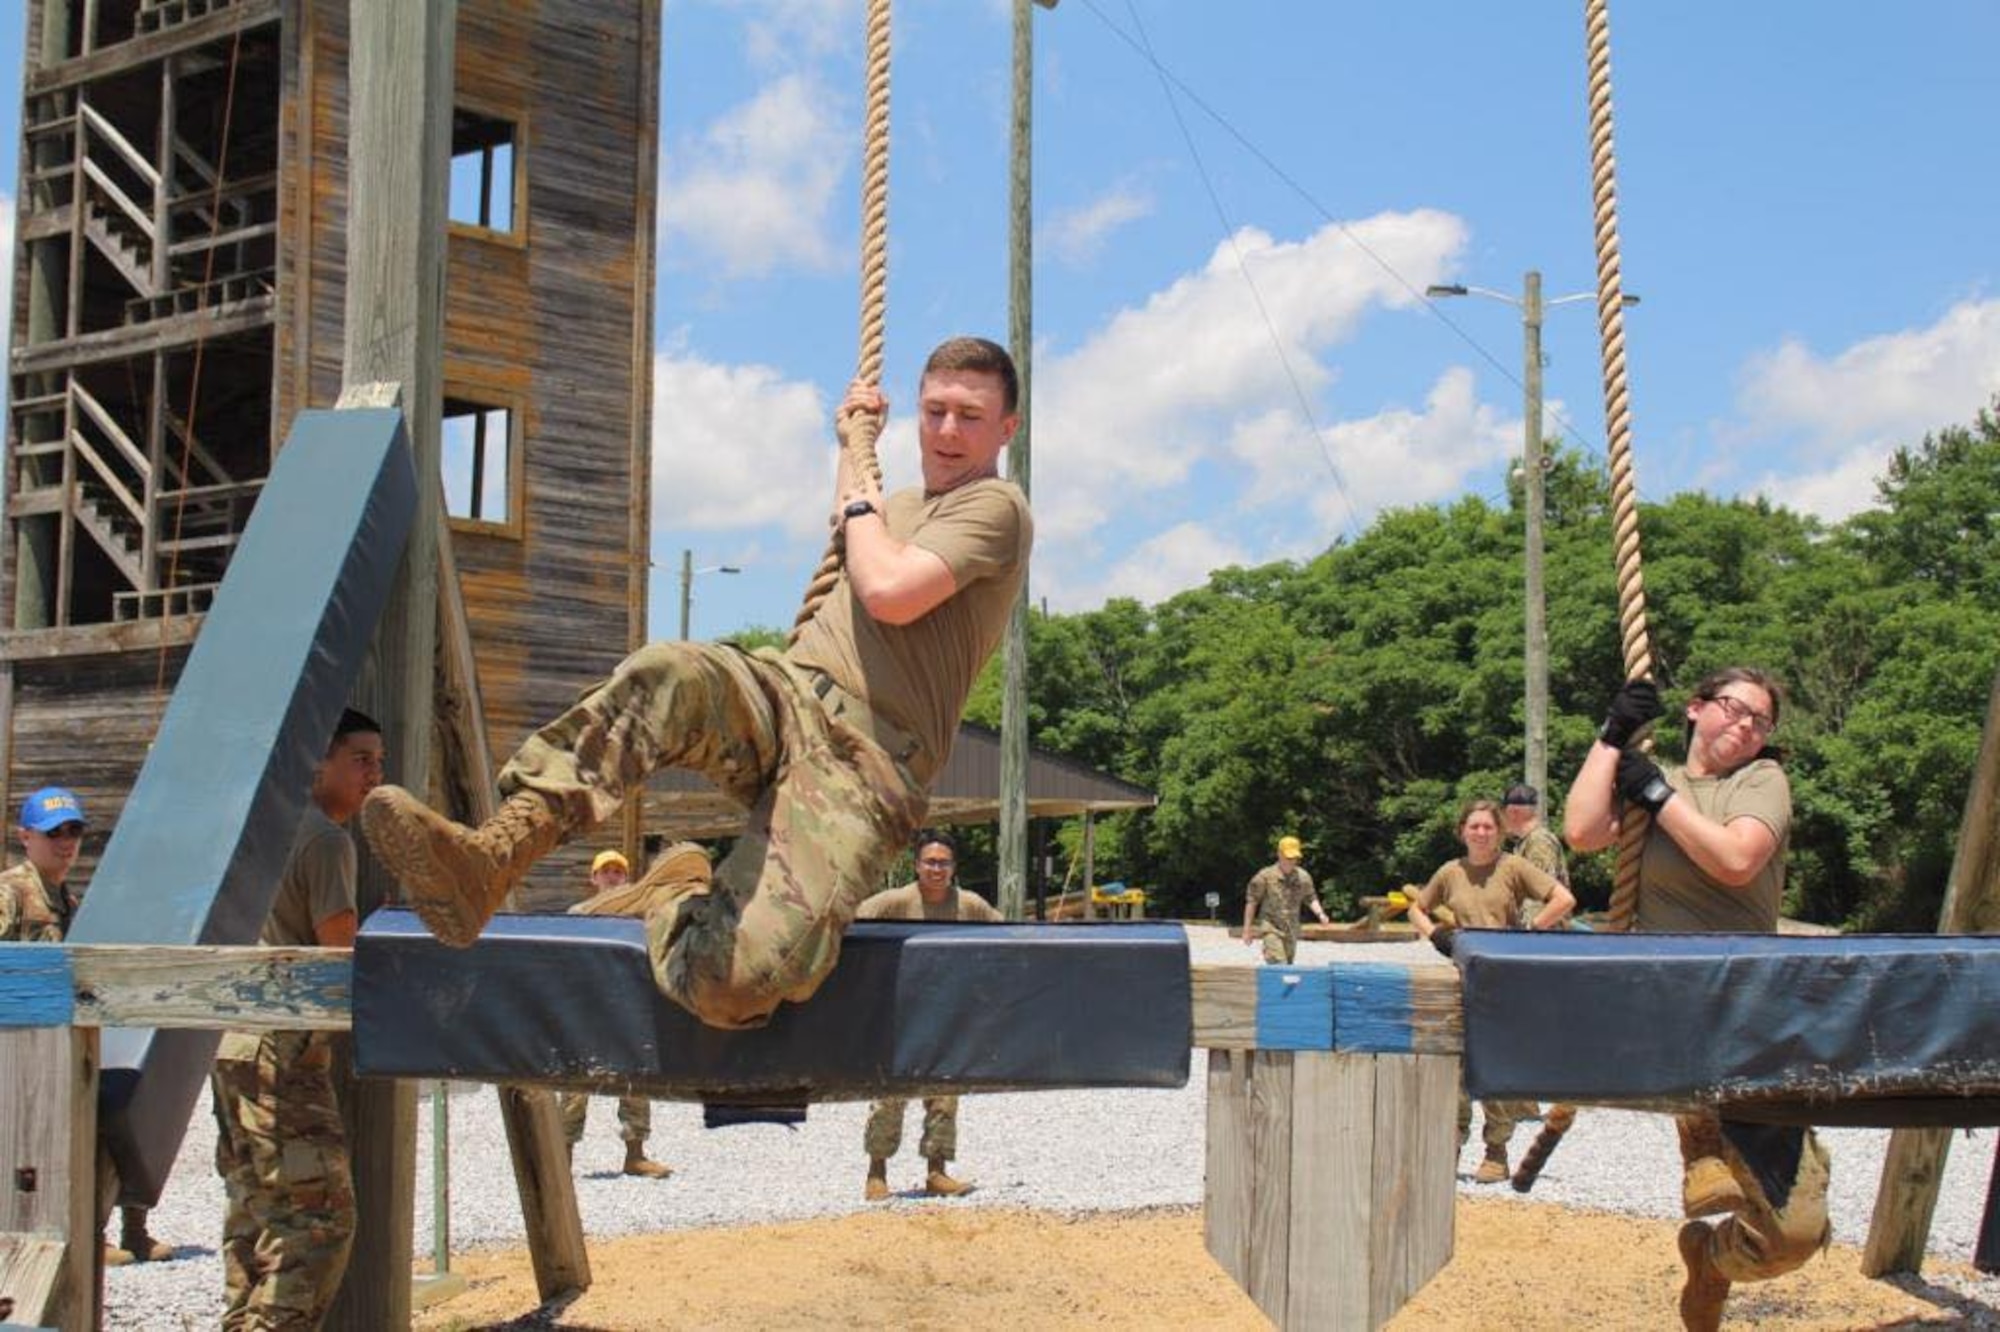 Air Force ROTC cadets take part in an obstacle course in May 2022, on Maxwell Air Force Base, Alabama. This is the first time since 2019 that field training will be conducted at normal capacity on Maxwell throughout the summer, marking a departure from modified operations as the COVID-19 pandemic abates.